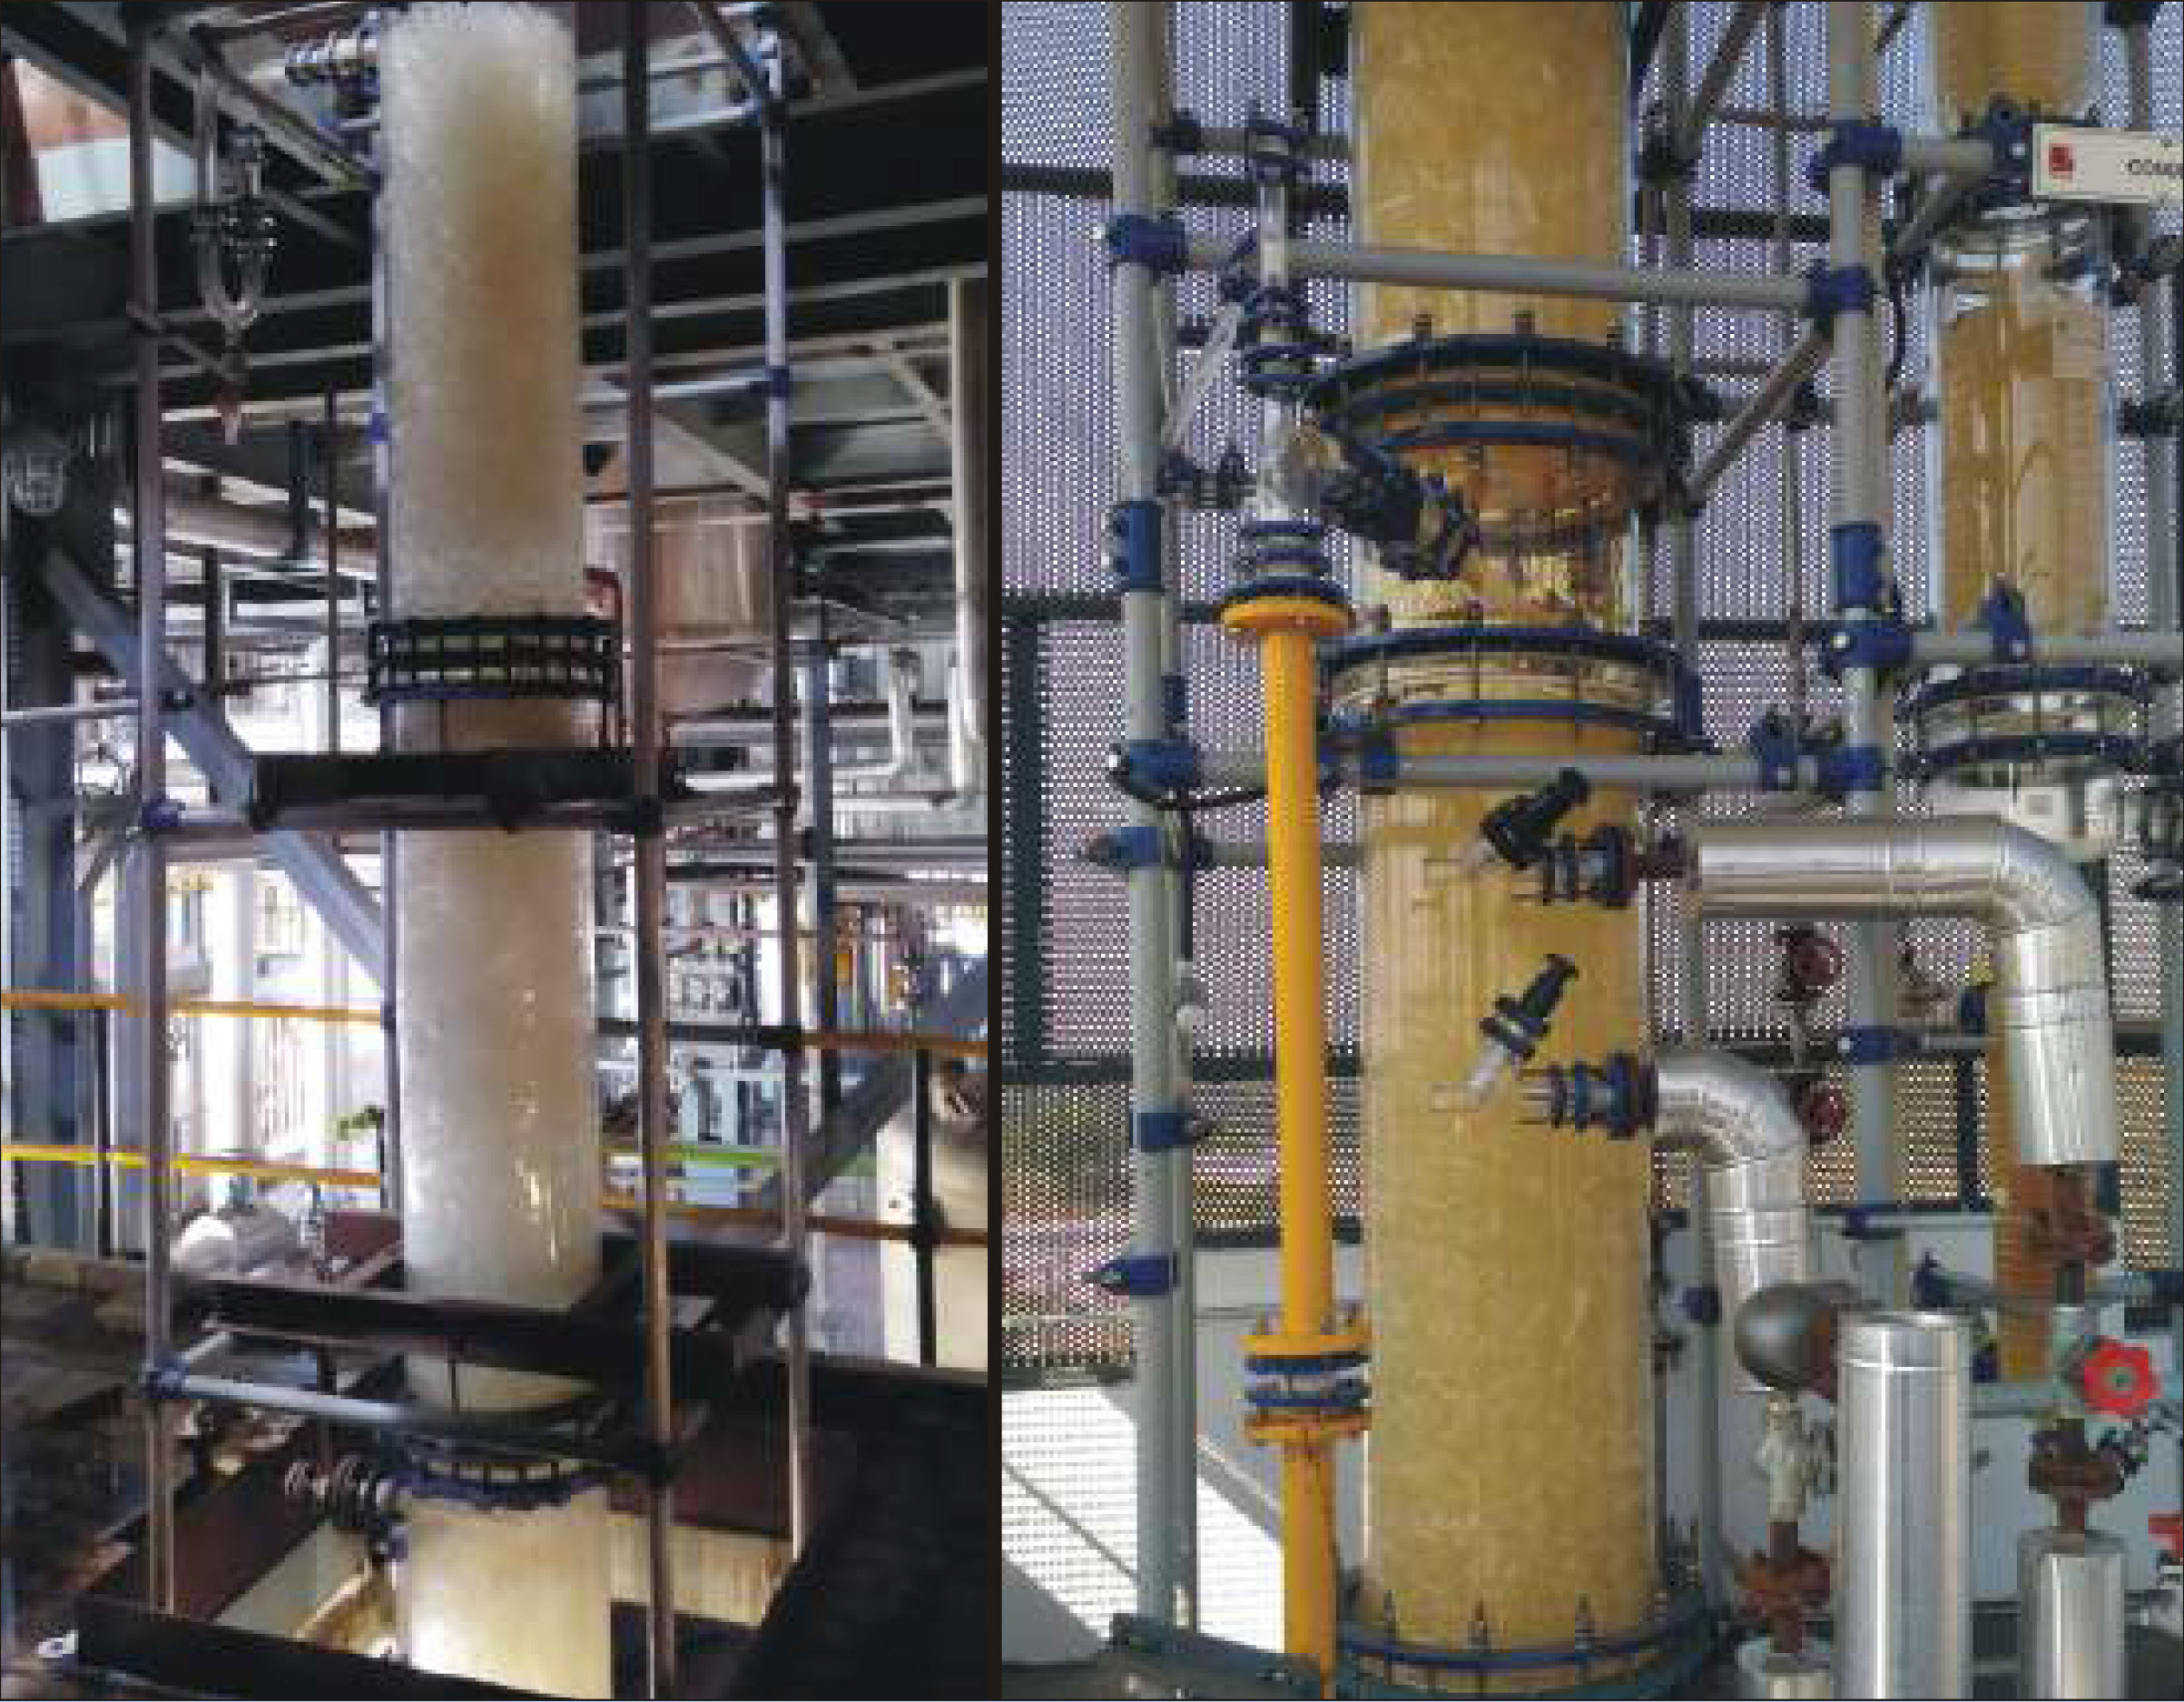 Buy Glass Column with Splitter Section, Glass Column with Splitter Section Price,   Column Accessories, Column Adapters, Column Packing, Column Section, Distillation Column, Measurement And Control, Packing Supports, Reflux Divider, Distributors, Dealers, Wholesalers, Manufacturers, in canada, Goel Scientific Glass Works Ltd, Canada